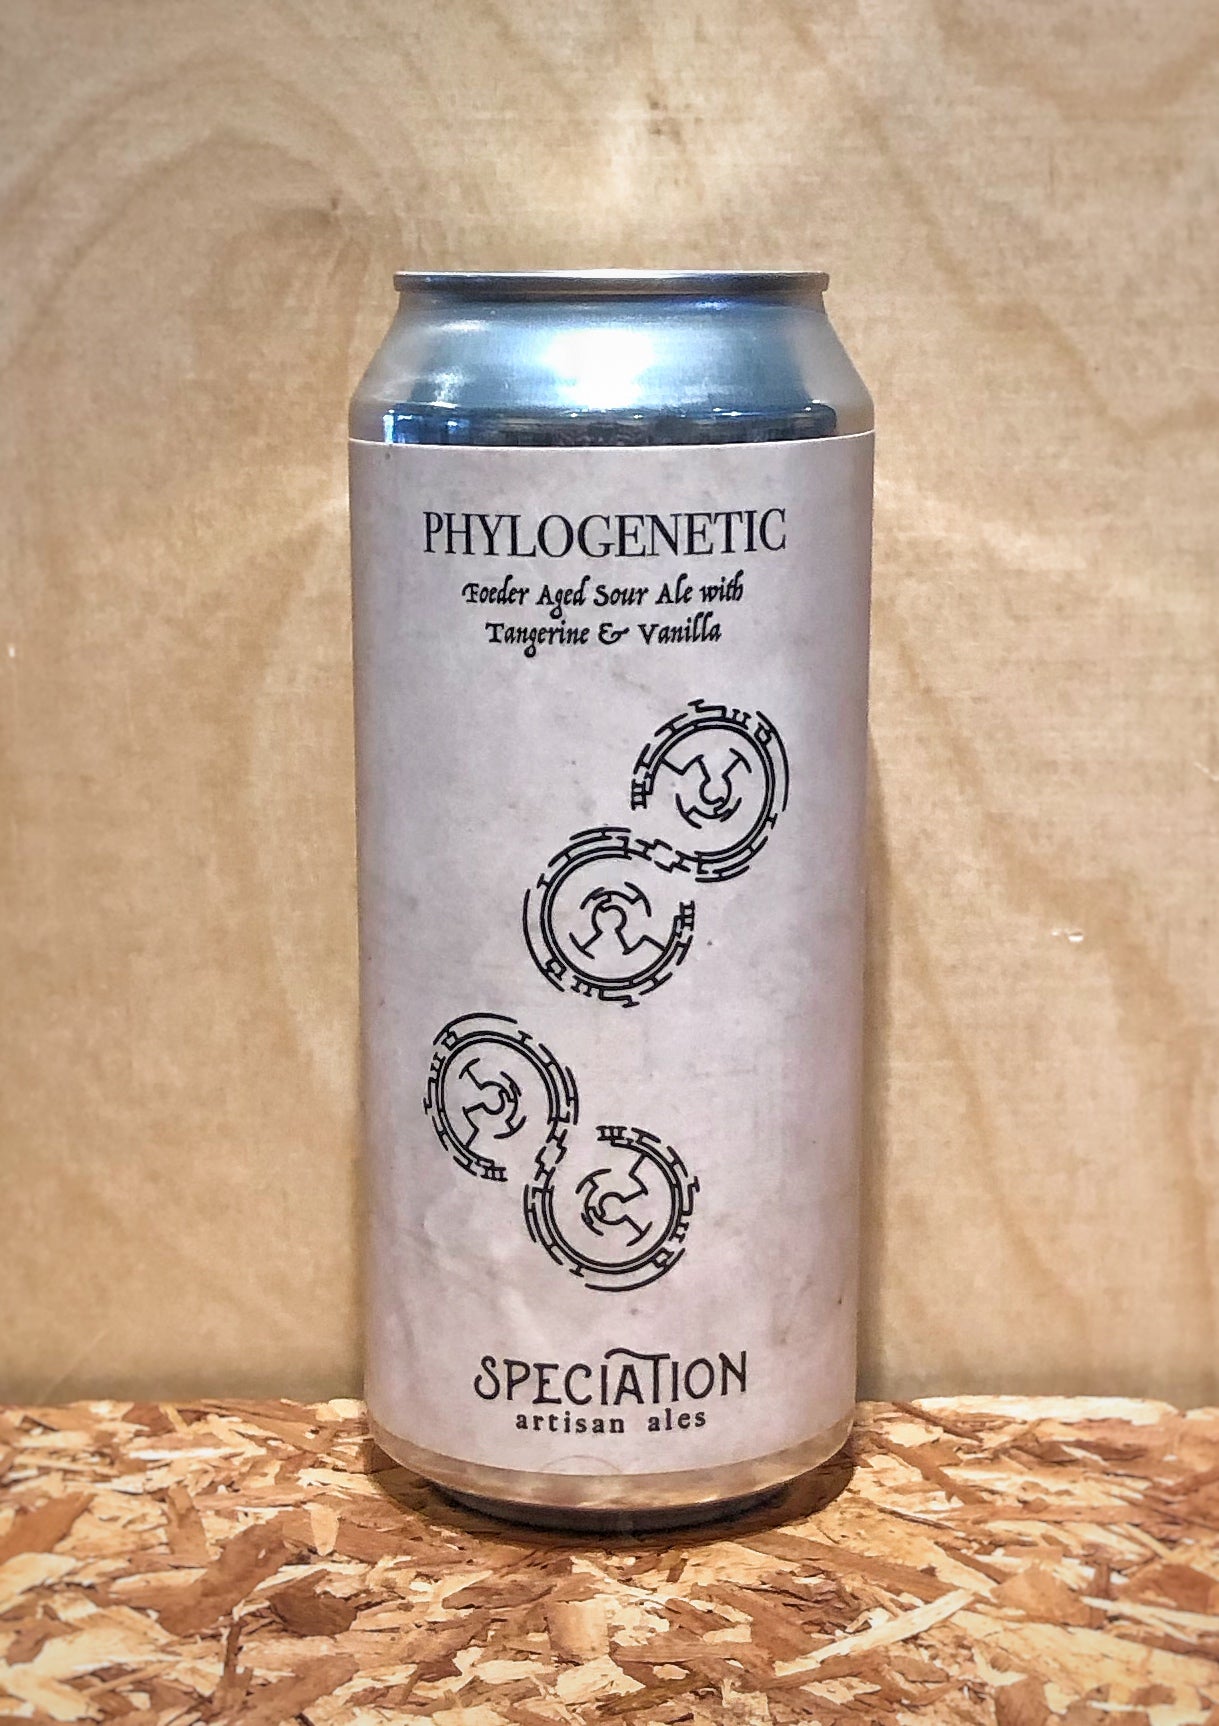 Speciation Artisan Ales 'Phylogenetic' Foeder Aged Sour Ale with Tangerine and Vanilla (Grand Rapids, MI)